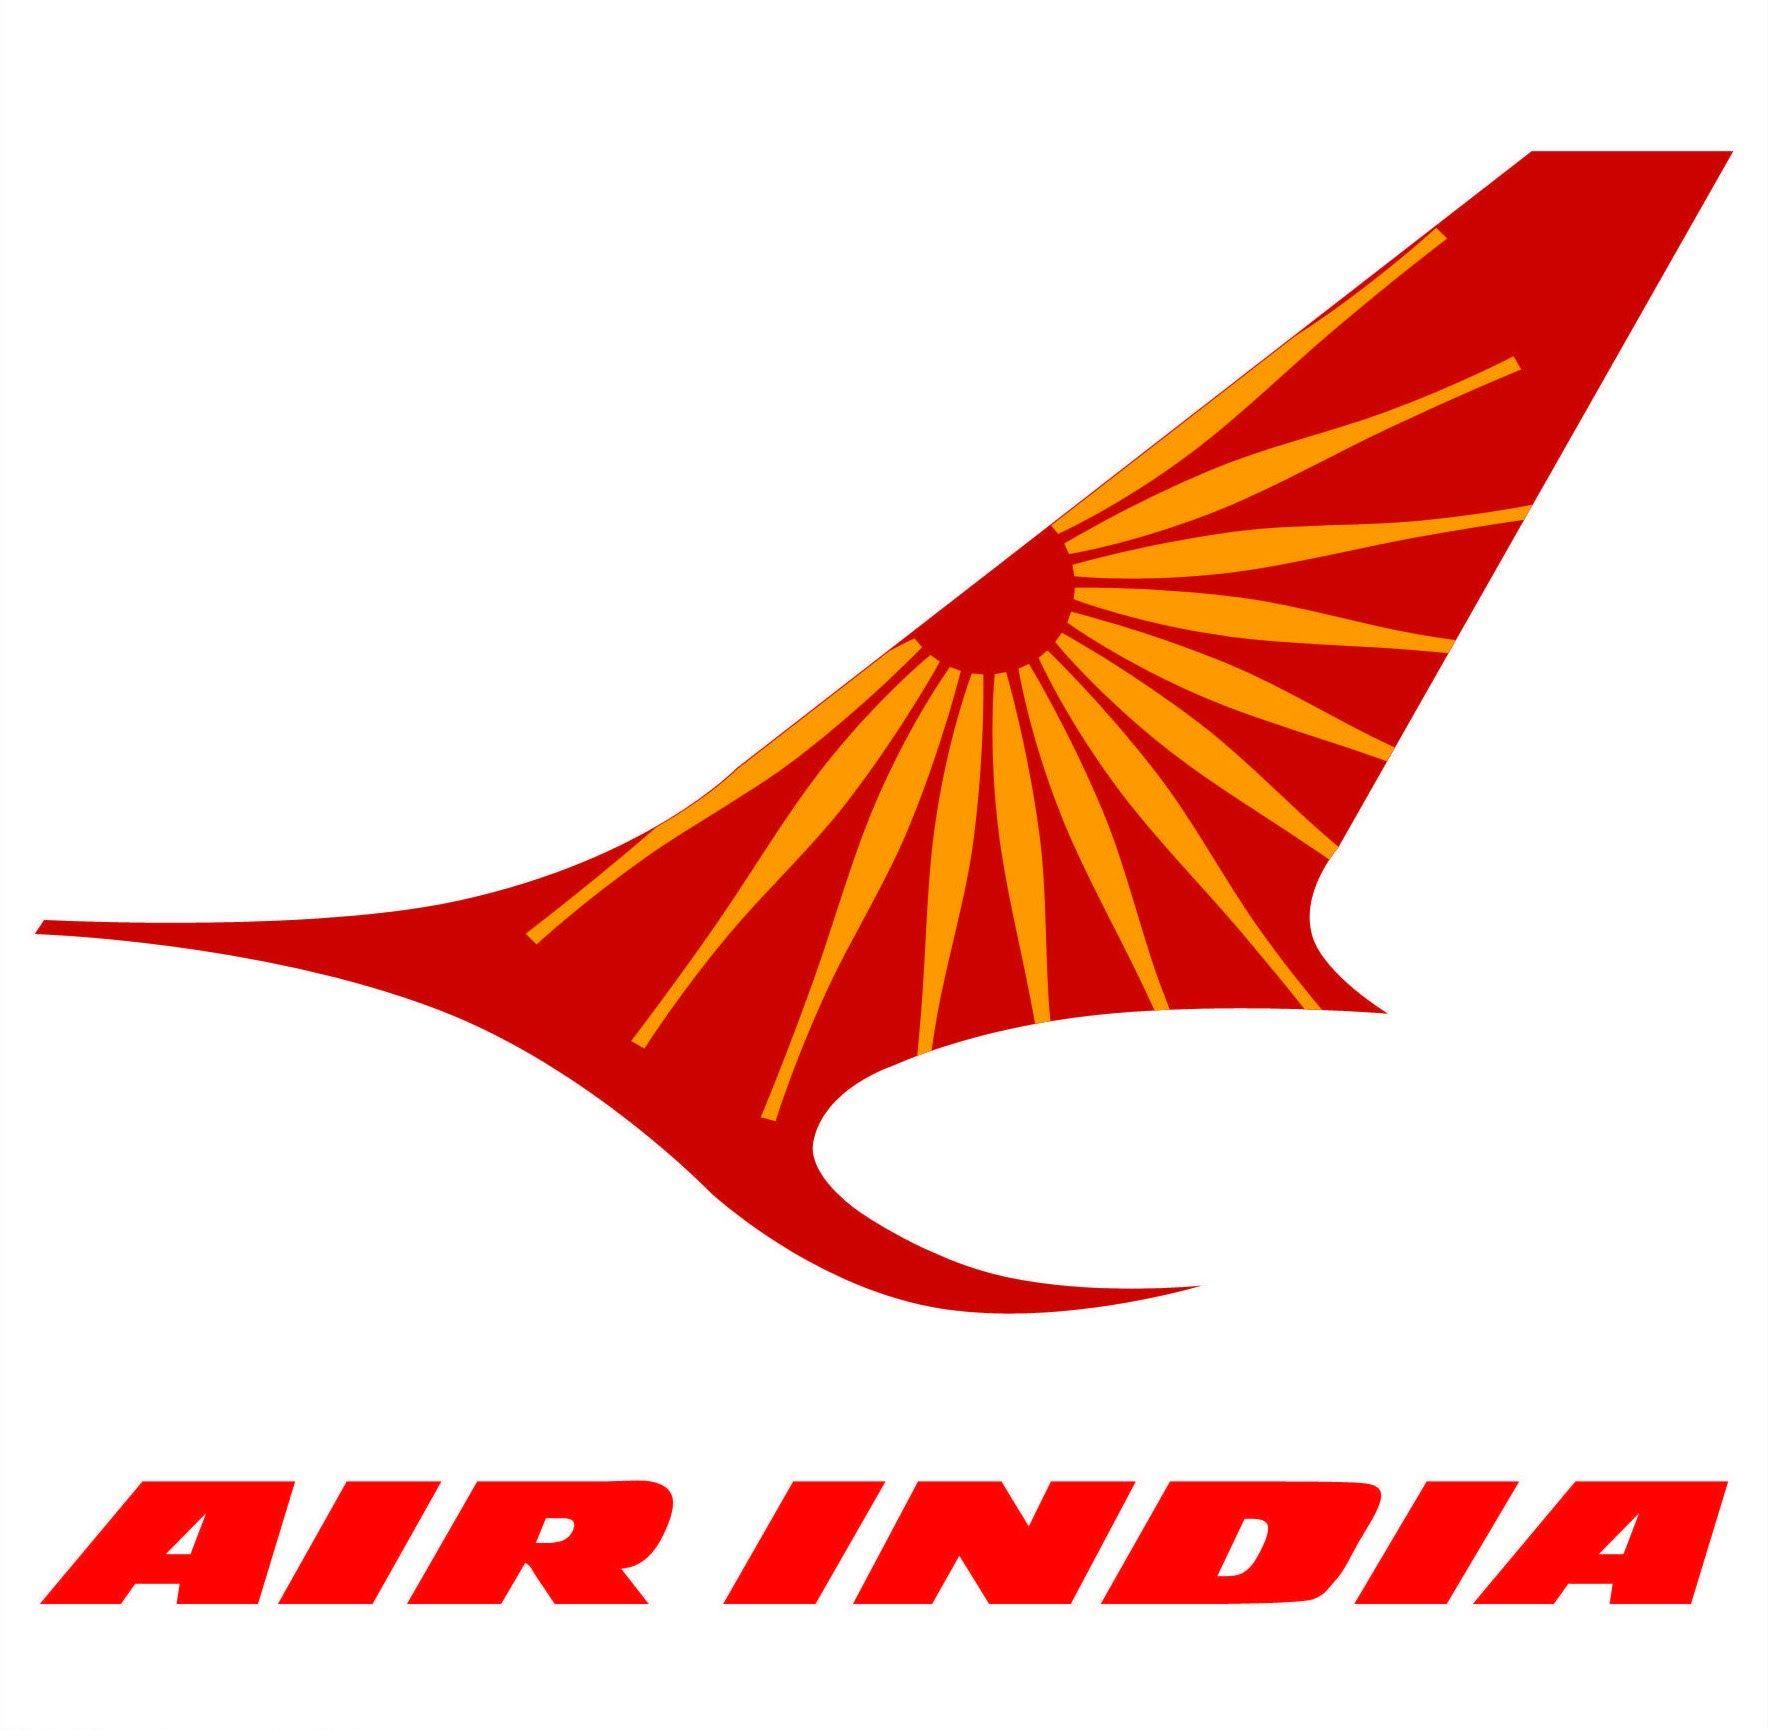 Airline Swan Logo - Air India Flight Booking - Flight Routes, Air India Airline Reviews ...